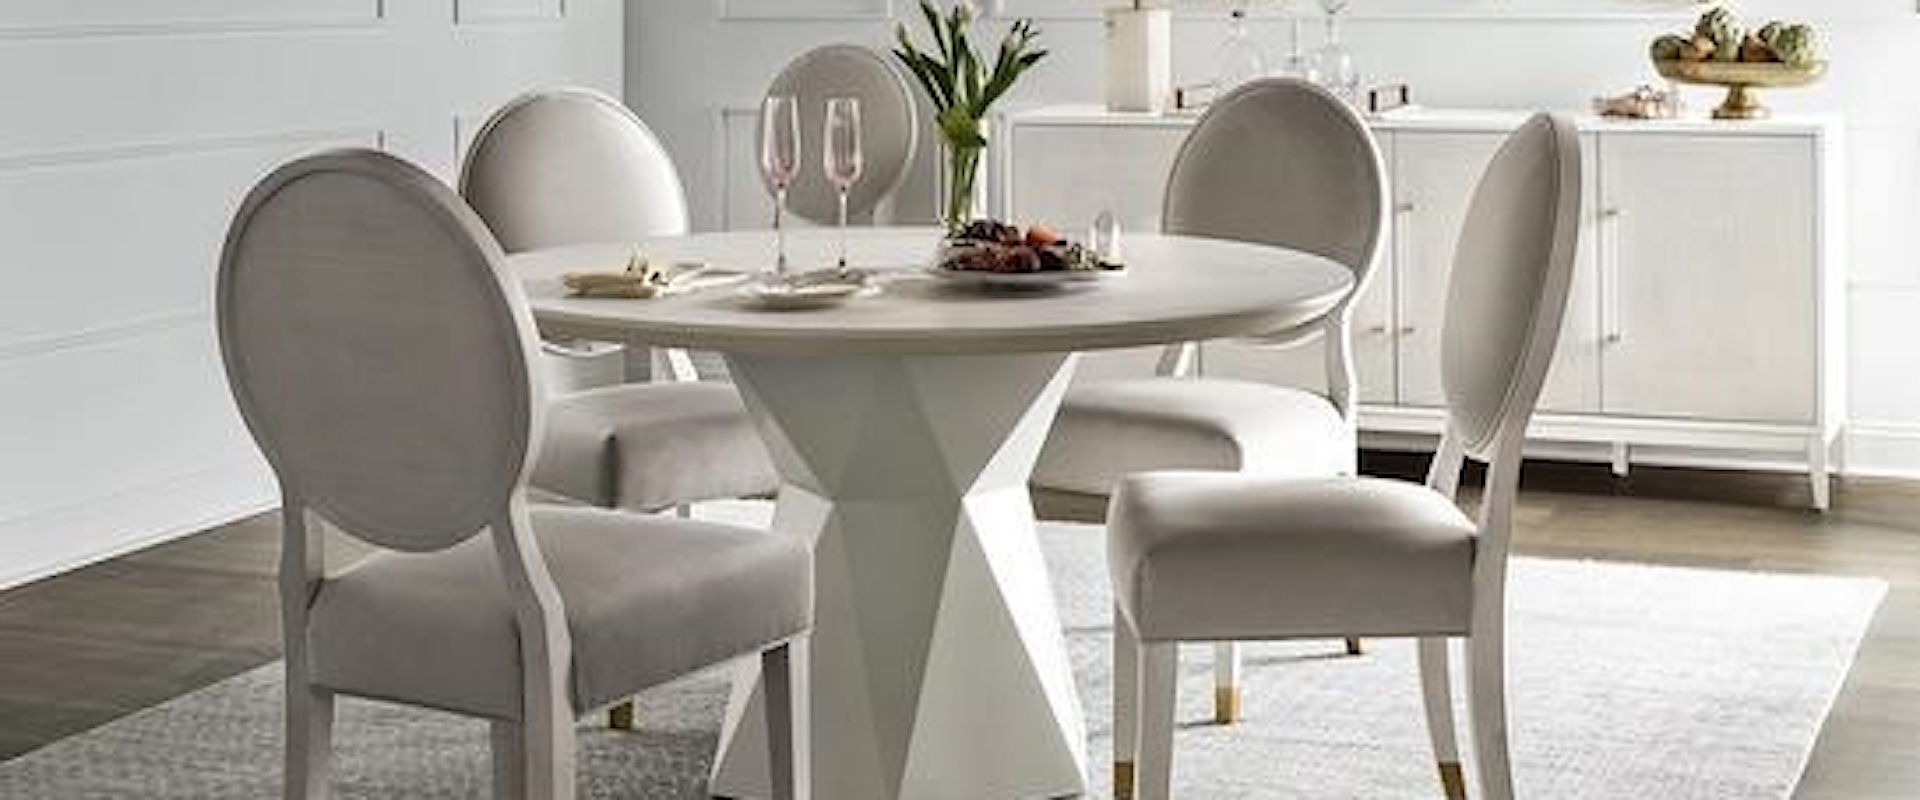 Geranium Dining Table x 4 side chairs